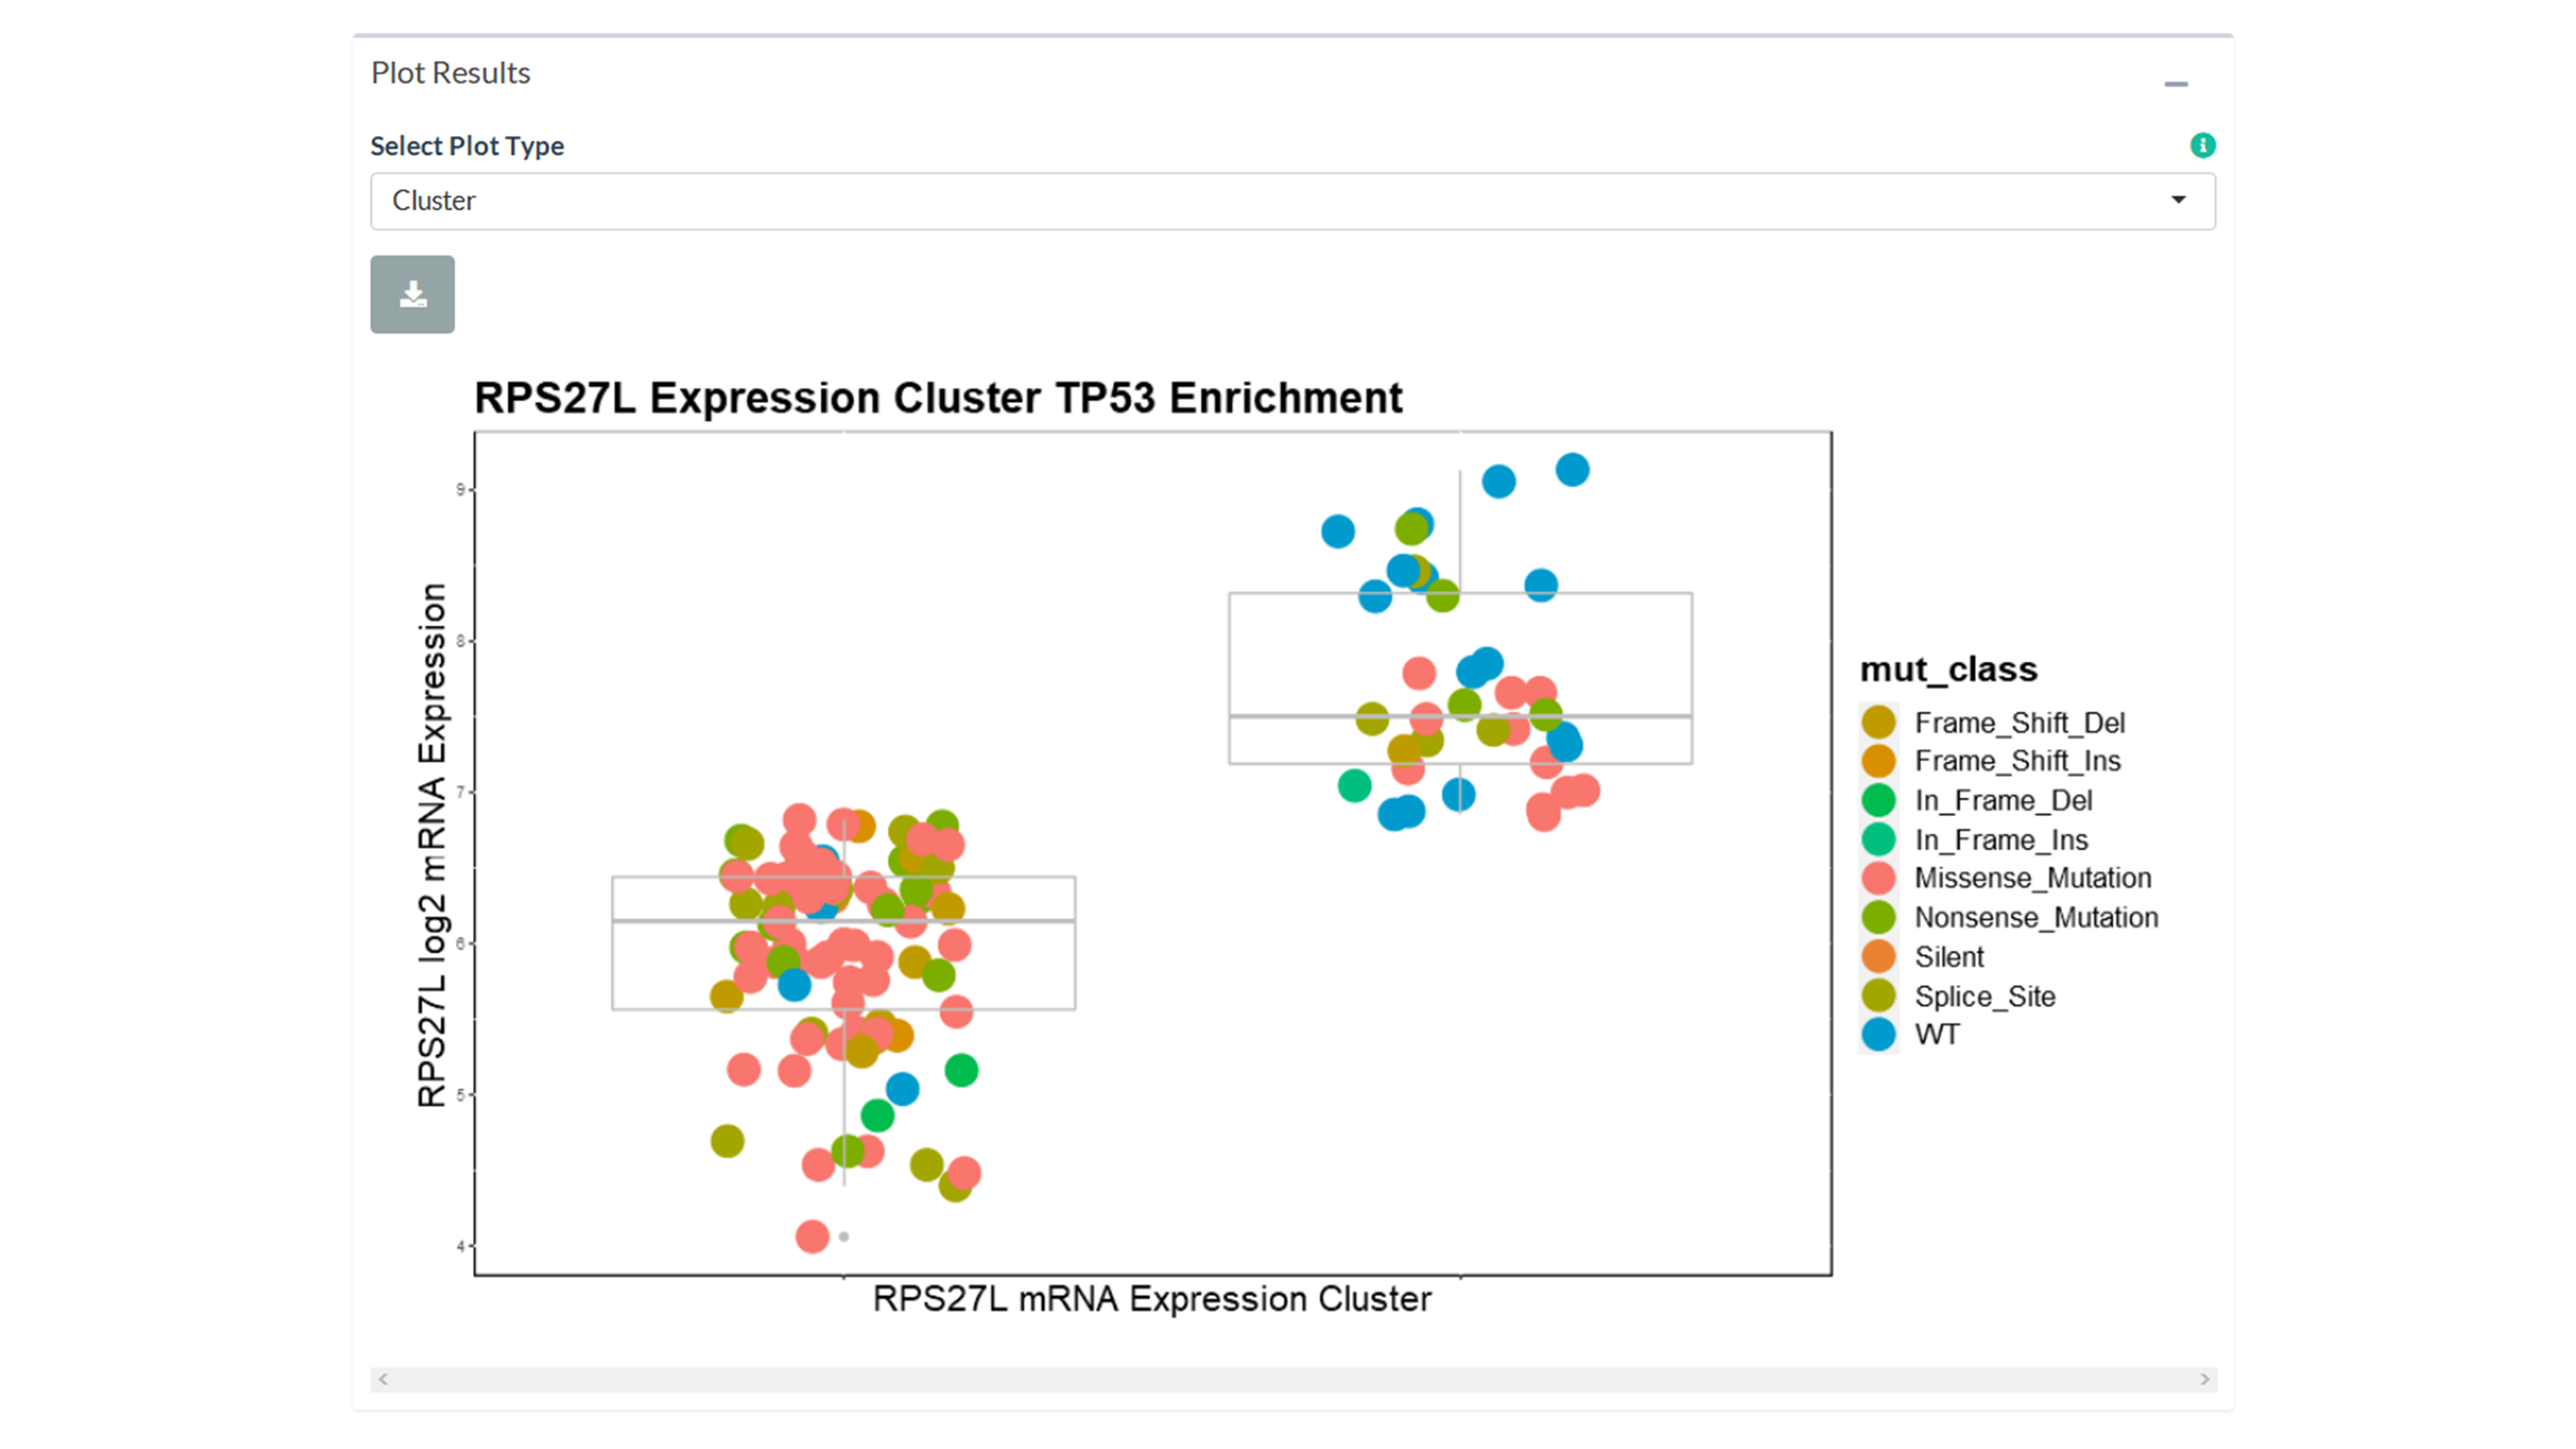 Mutational Status for Gene Expression Clusters